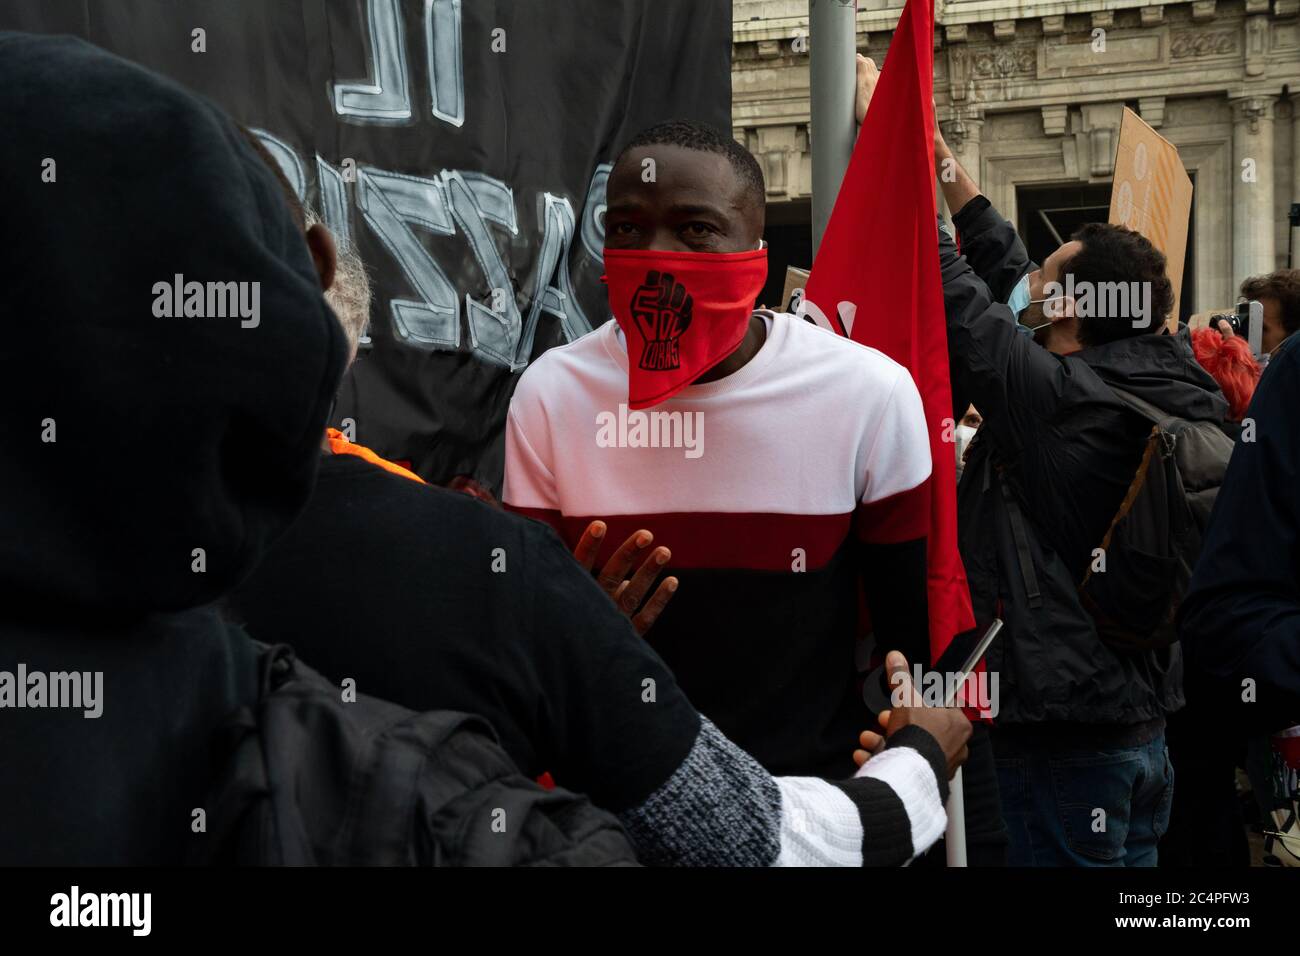 Member of the Italian trade union named 'Cobas' interviewed during the protest assembly in solidarity to Black Lives Matter (BLM) movement. Stock Photo